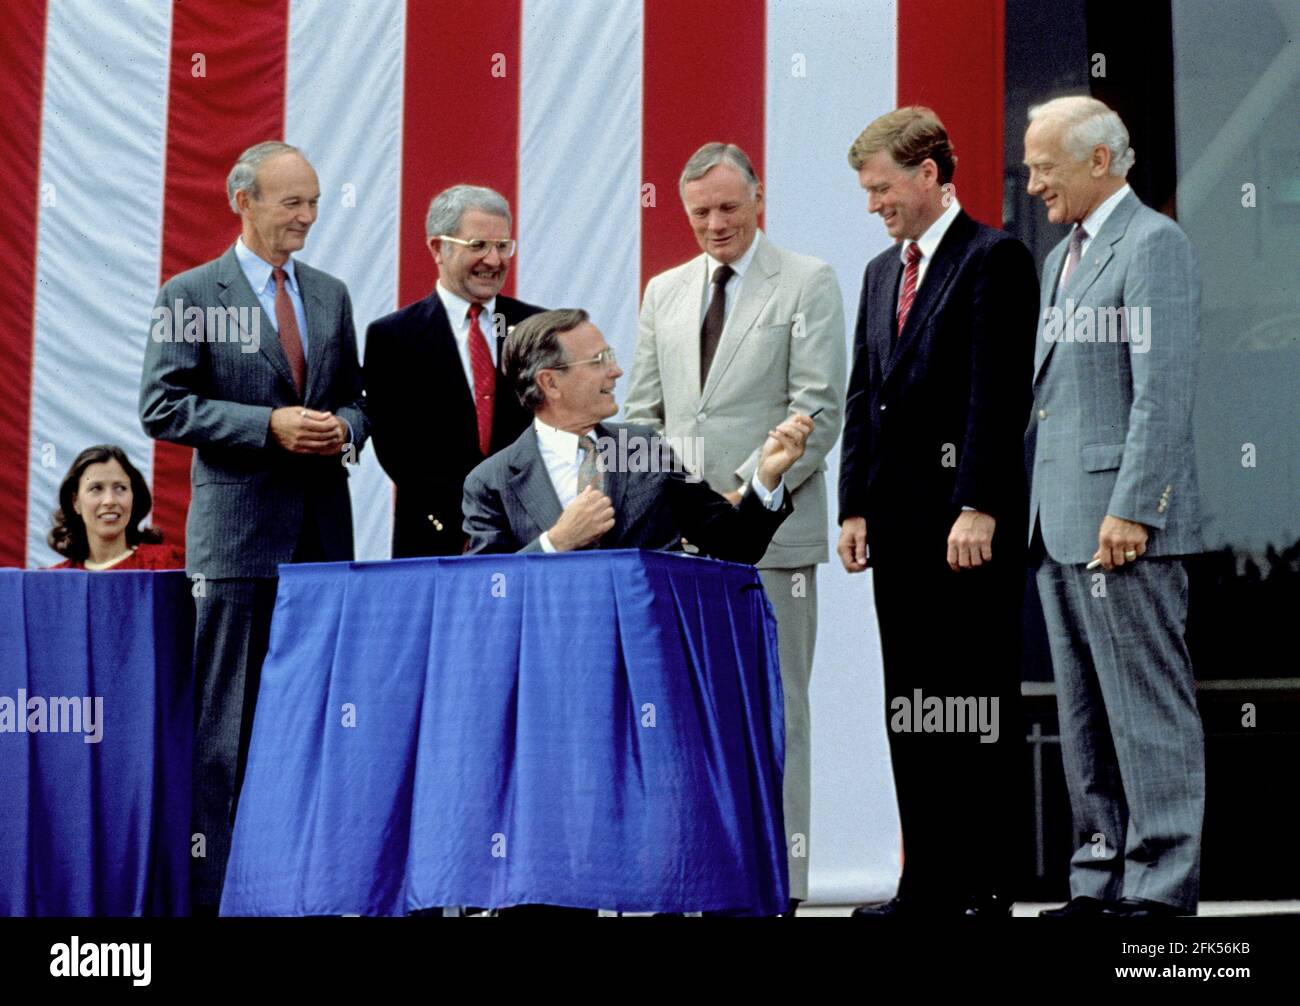 United States President George H.W. Bush signs a proclamation after announcing plans for the Space Exploration Initiative (SEI) on the the 20th anniversary of the Apollo 11 Moon landing at the National Air and Space Museum in Washington, DC on July 20, 1989. From left to right: Marilyn Quayle (seated); Apollo 11 Command Module pilot Michael Collins; NASA Administrator Richard H. Truly; President Bush; Apollo 11 Command pilot Neil A. Armstrong; U.S. Vice President Dan Quayle; and Apollo 11 Lunar Module pilot Edwin (Buzz) Aldrin.Credit: Robert Trippett/Pool via CNP /MediaPunch Stock Photo